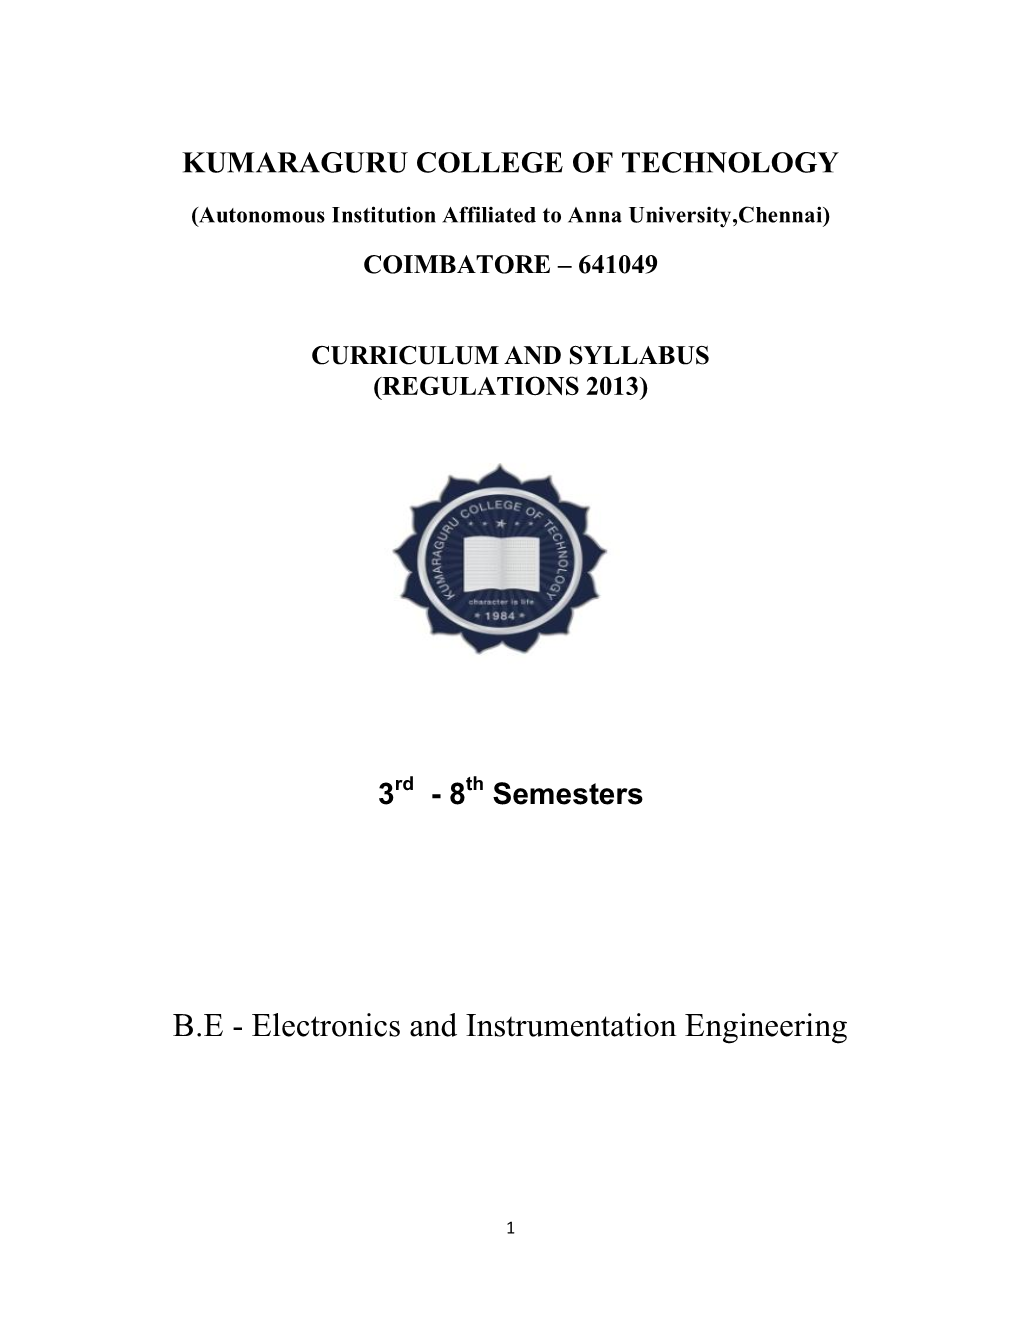 B.E Electronics & Instrumentation Engineering 3Rd to 8Th Semesters